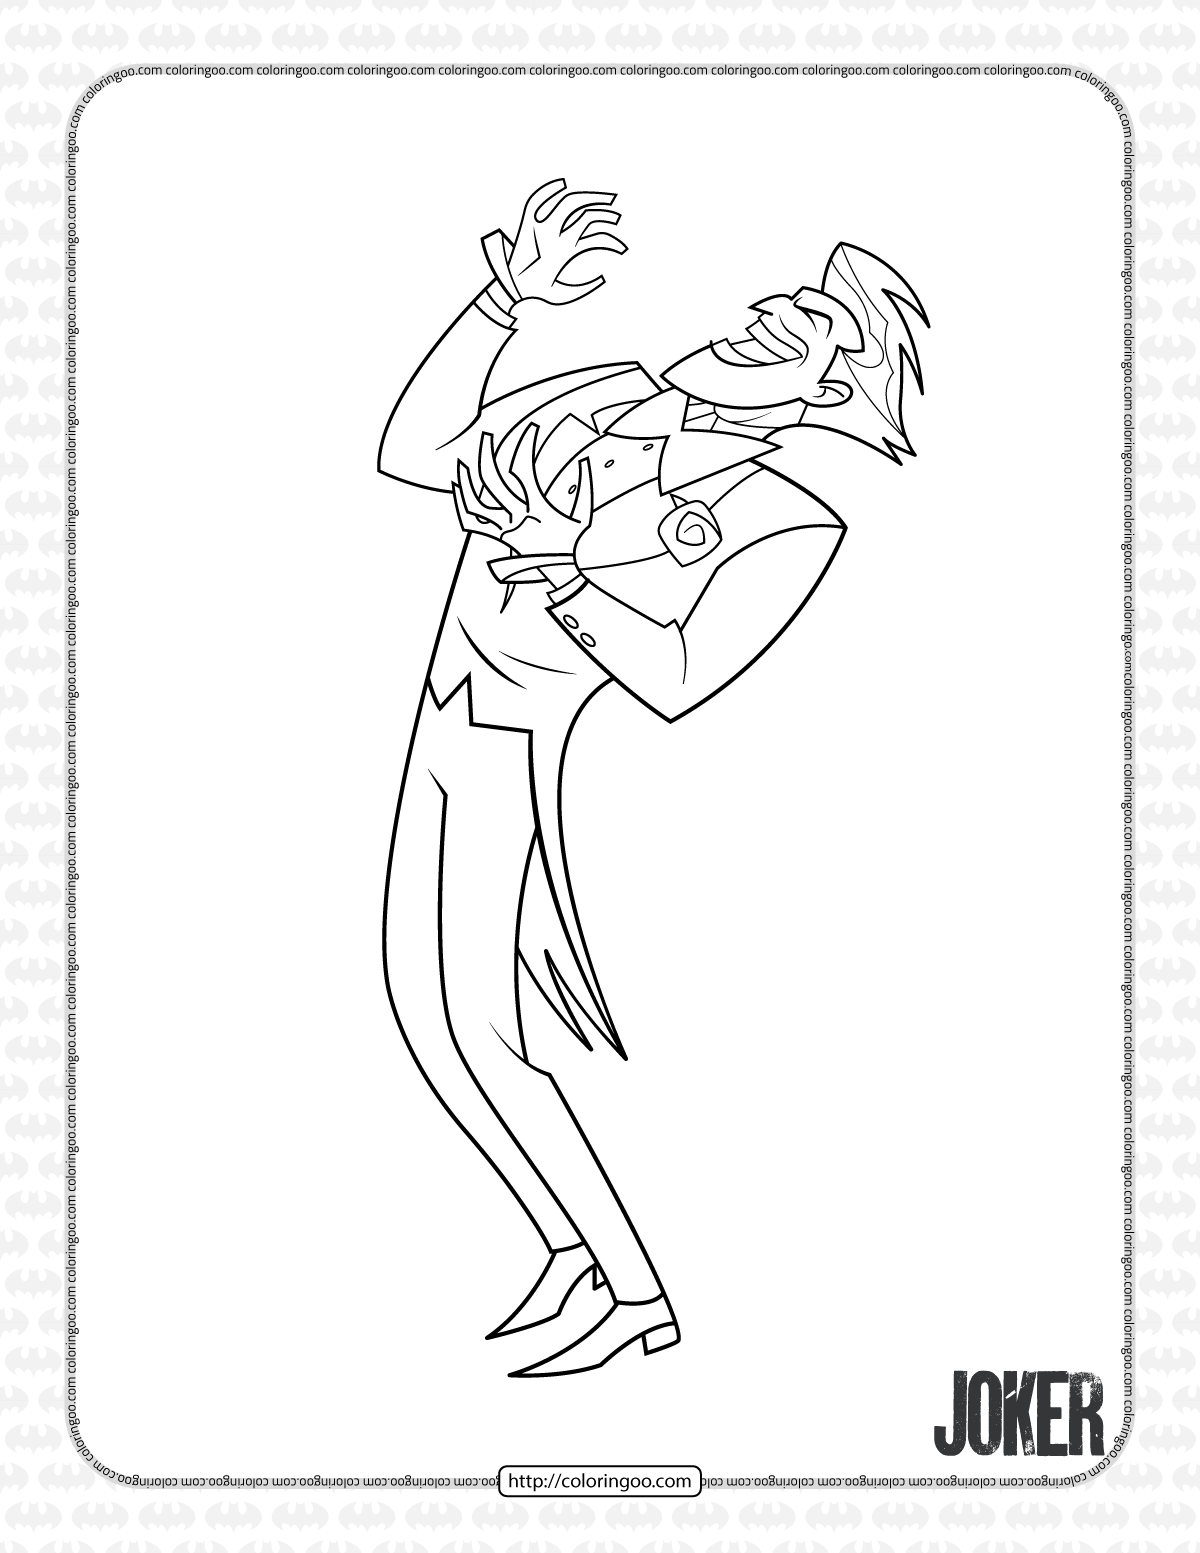 joker laughing coloring pages for kids